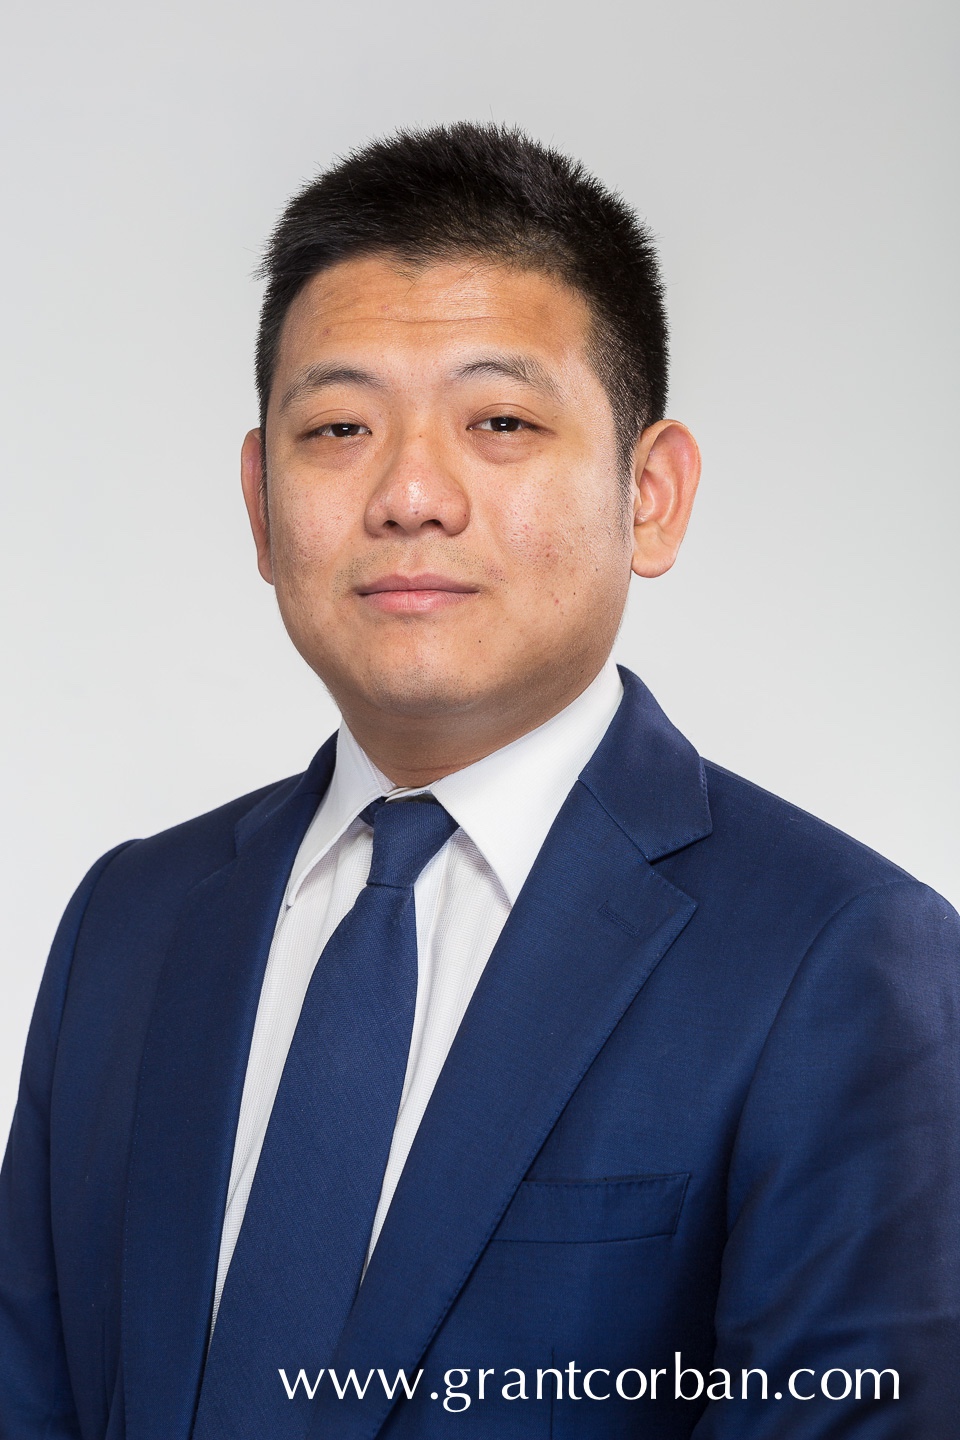 Corporate head shot photography for the New Zealand Malaysian Chamber of Commerce